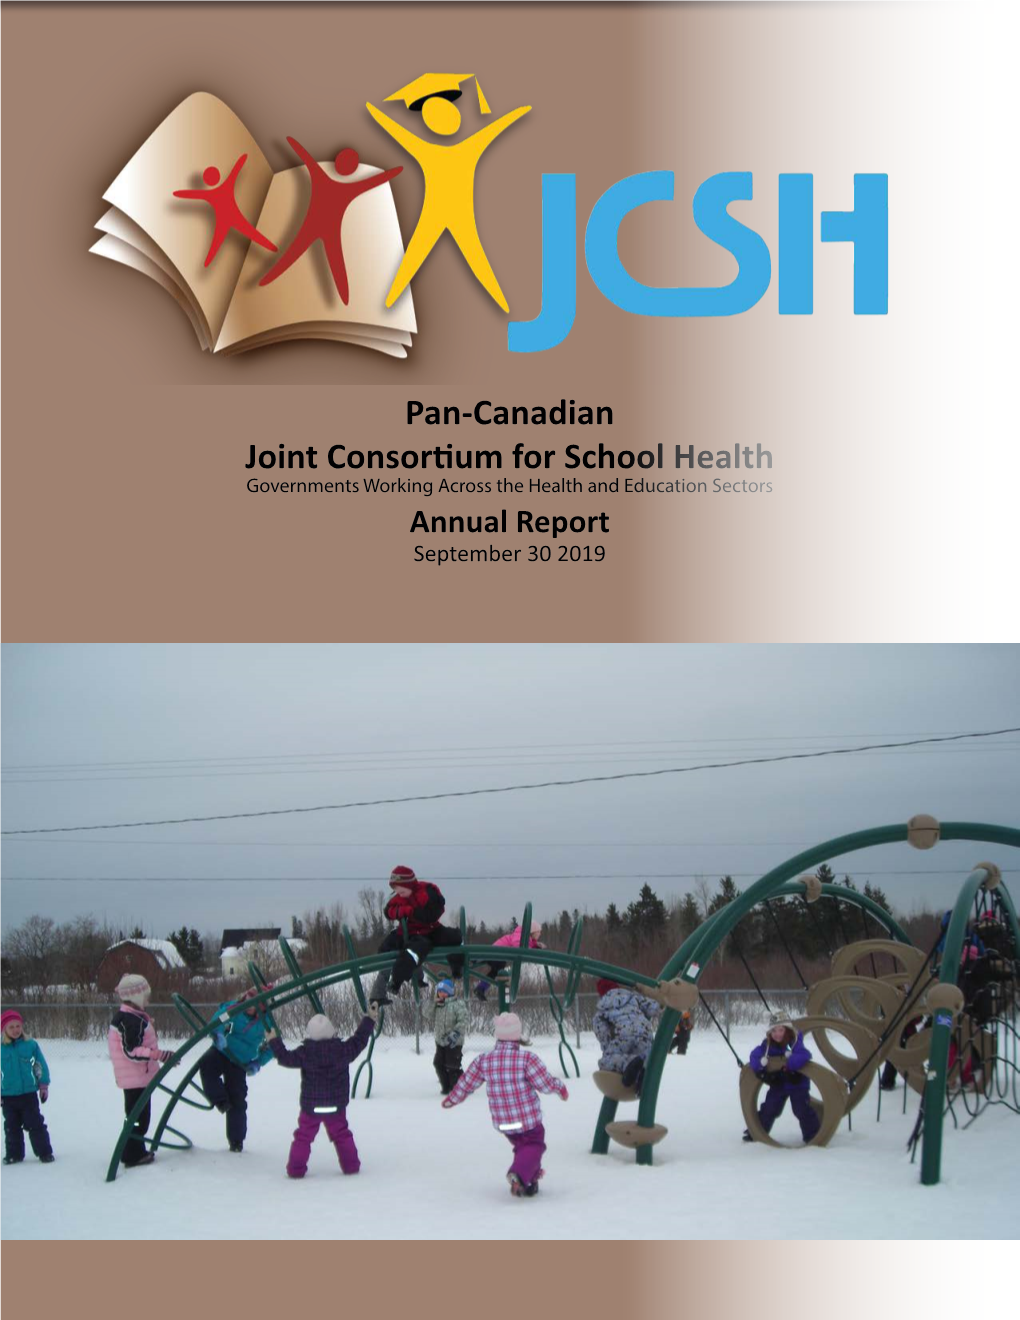 Download the 2019 JCSH Annual Report in English